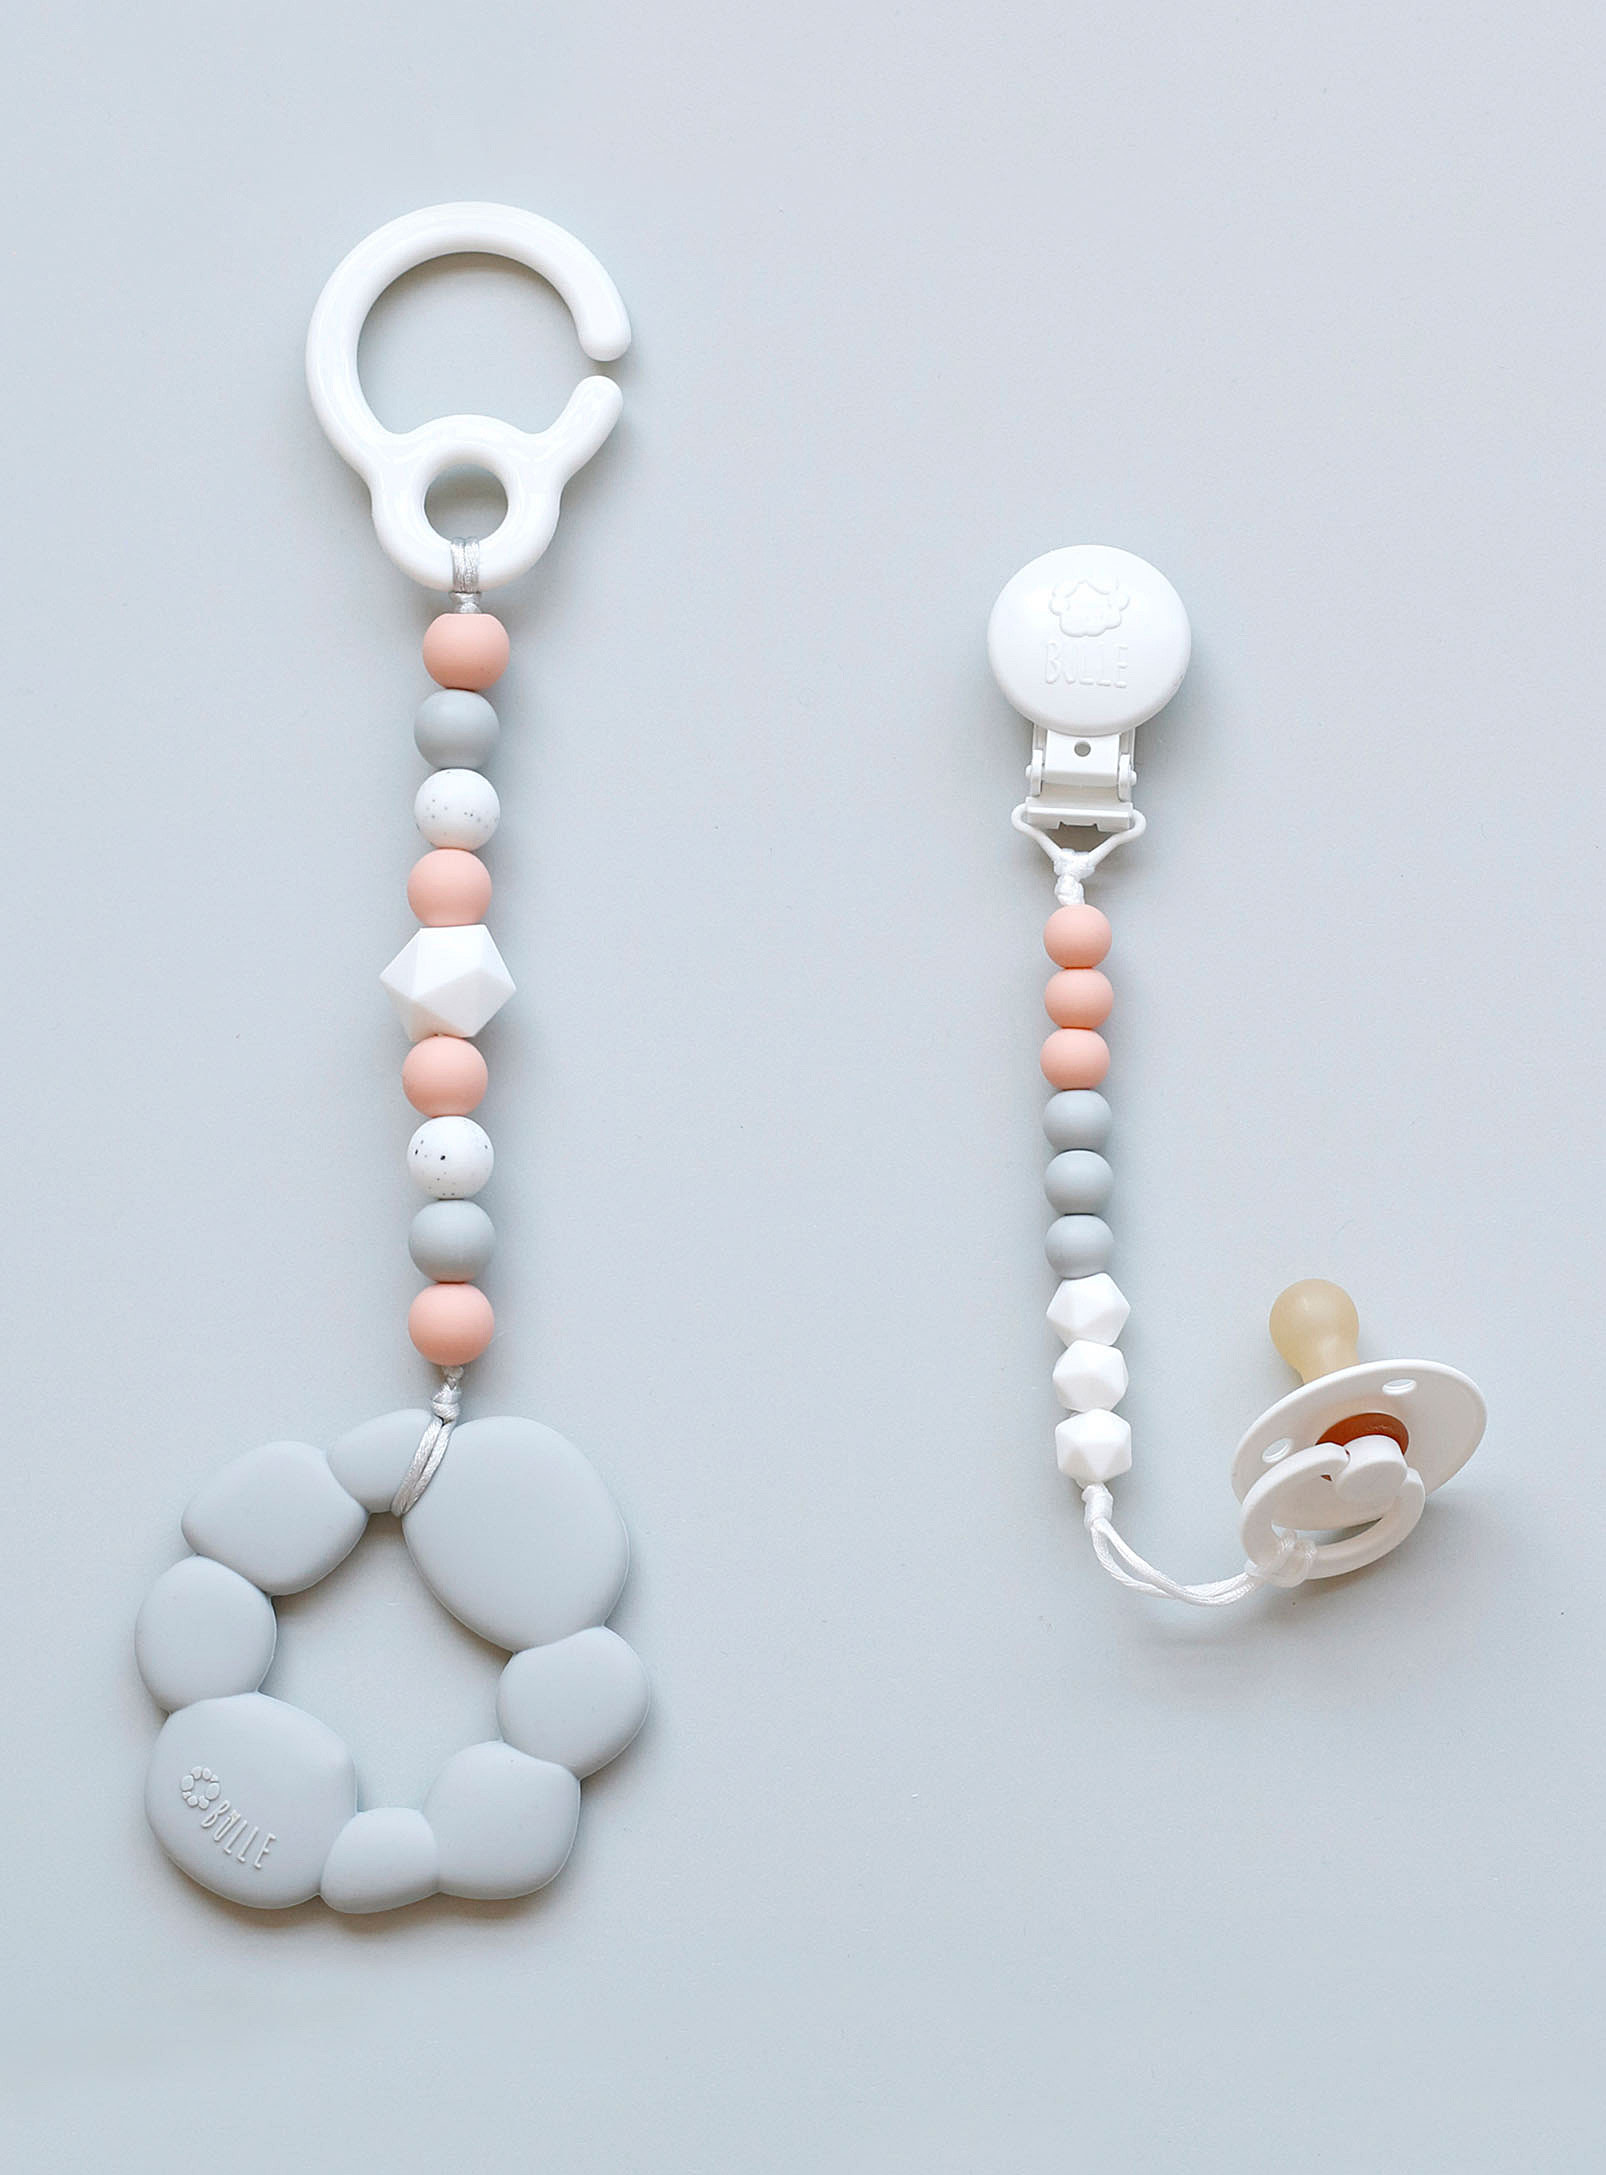 Two chains of round silicone beads with a pacifier tied to the end